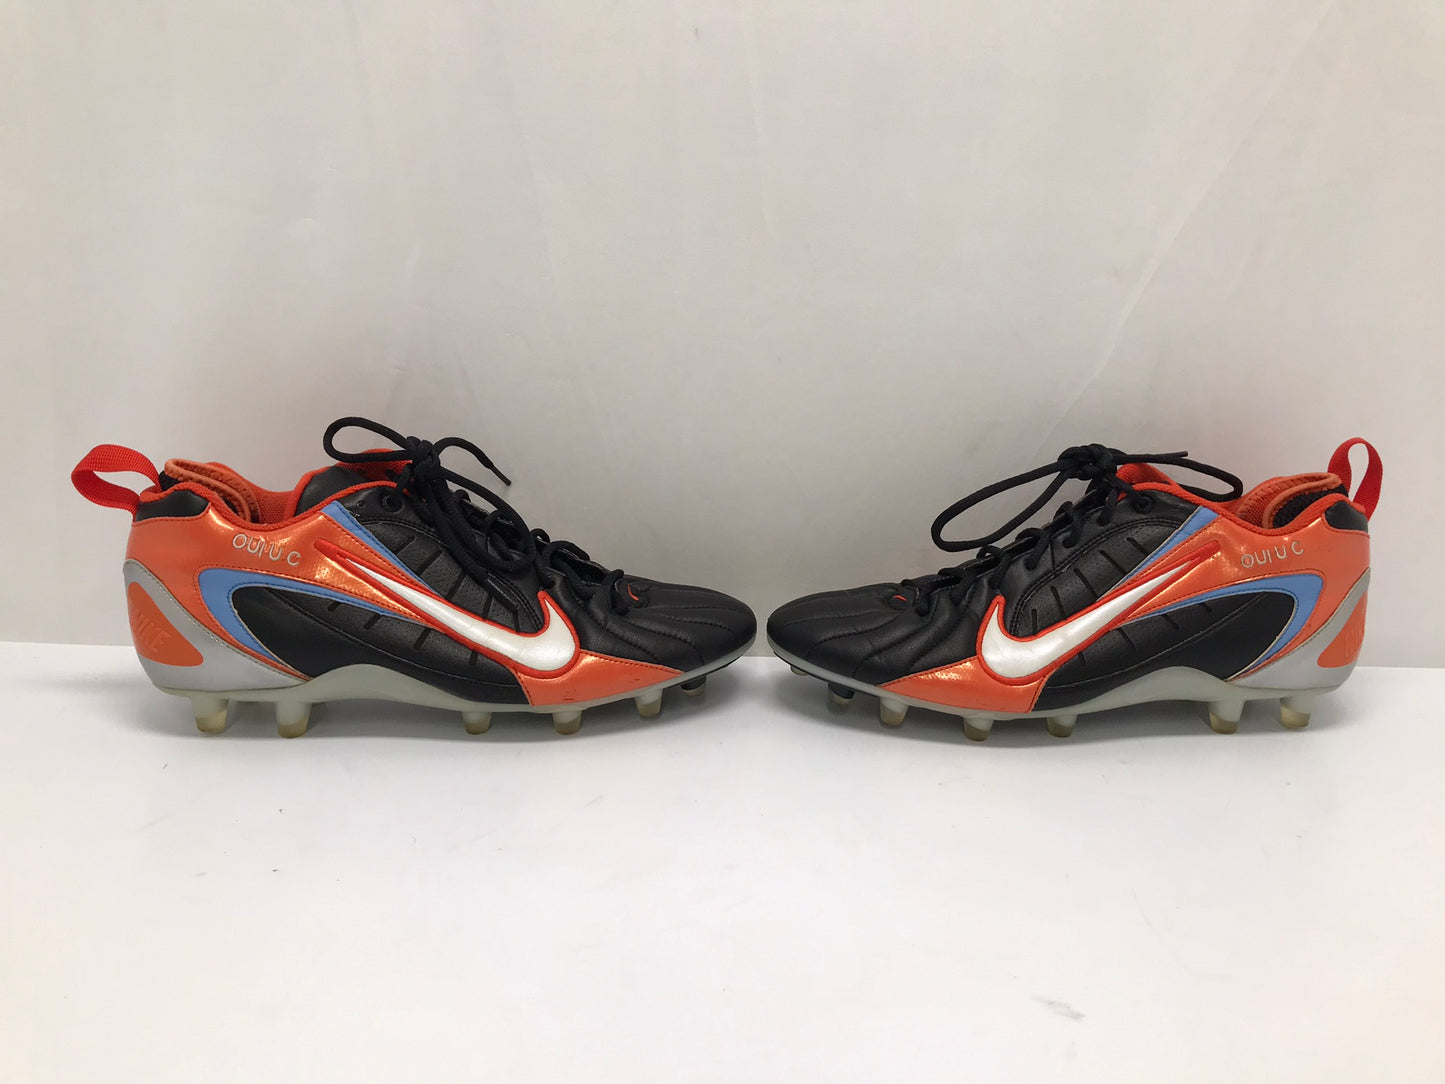 Football Cleats Men's Size 12 Nike iD Pro Quality Leather Black Orange As New